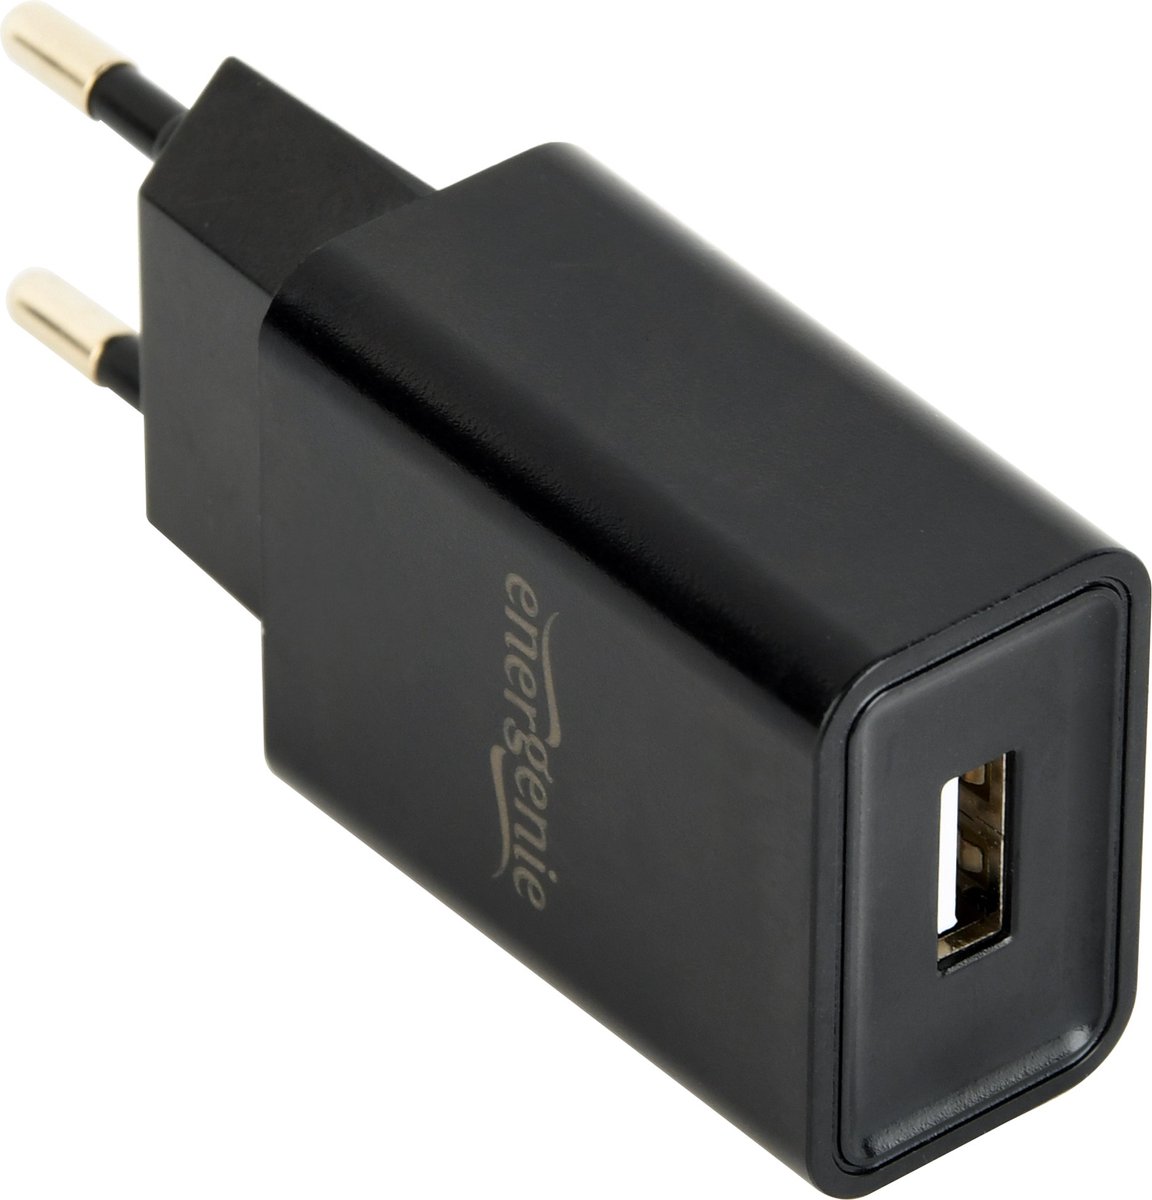 Energenie Universal USB charger, 2.1 A, black